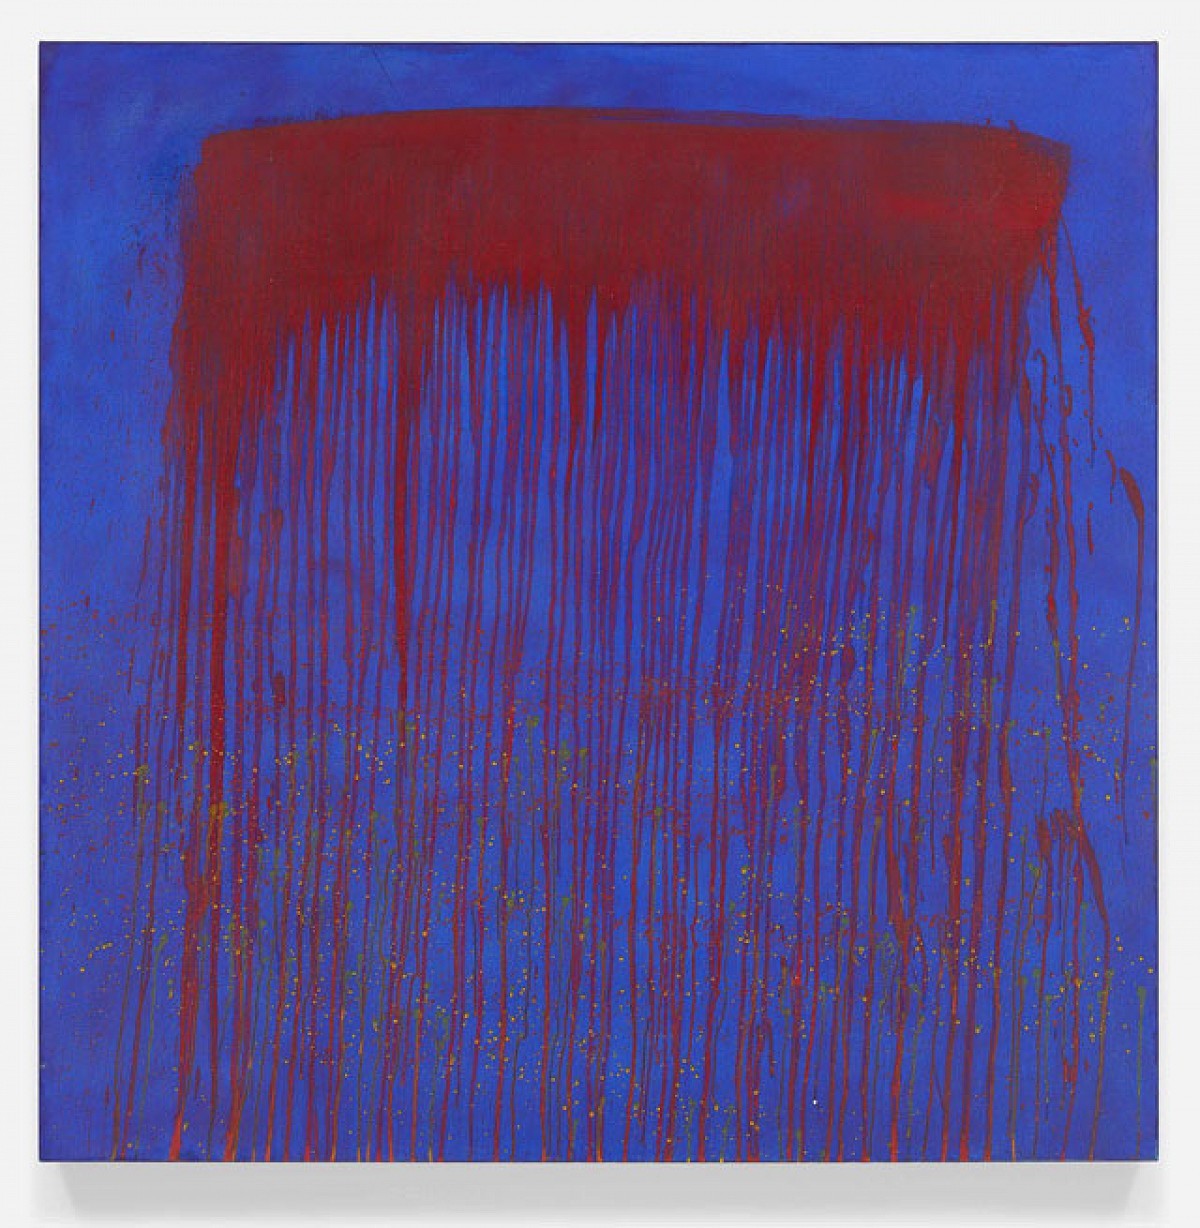 Vibrating Blue and Red Waterfall, 1993